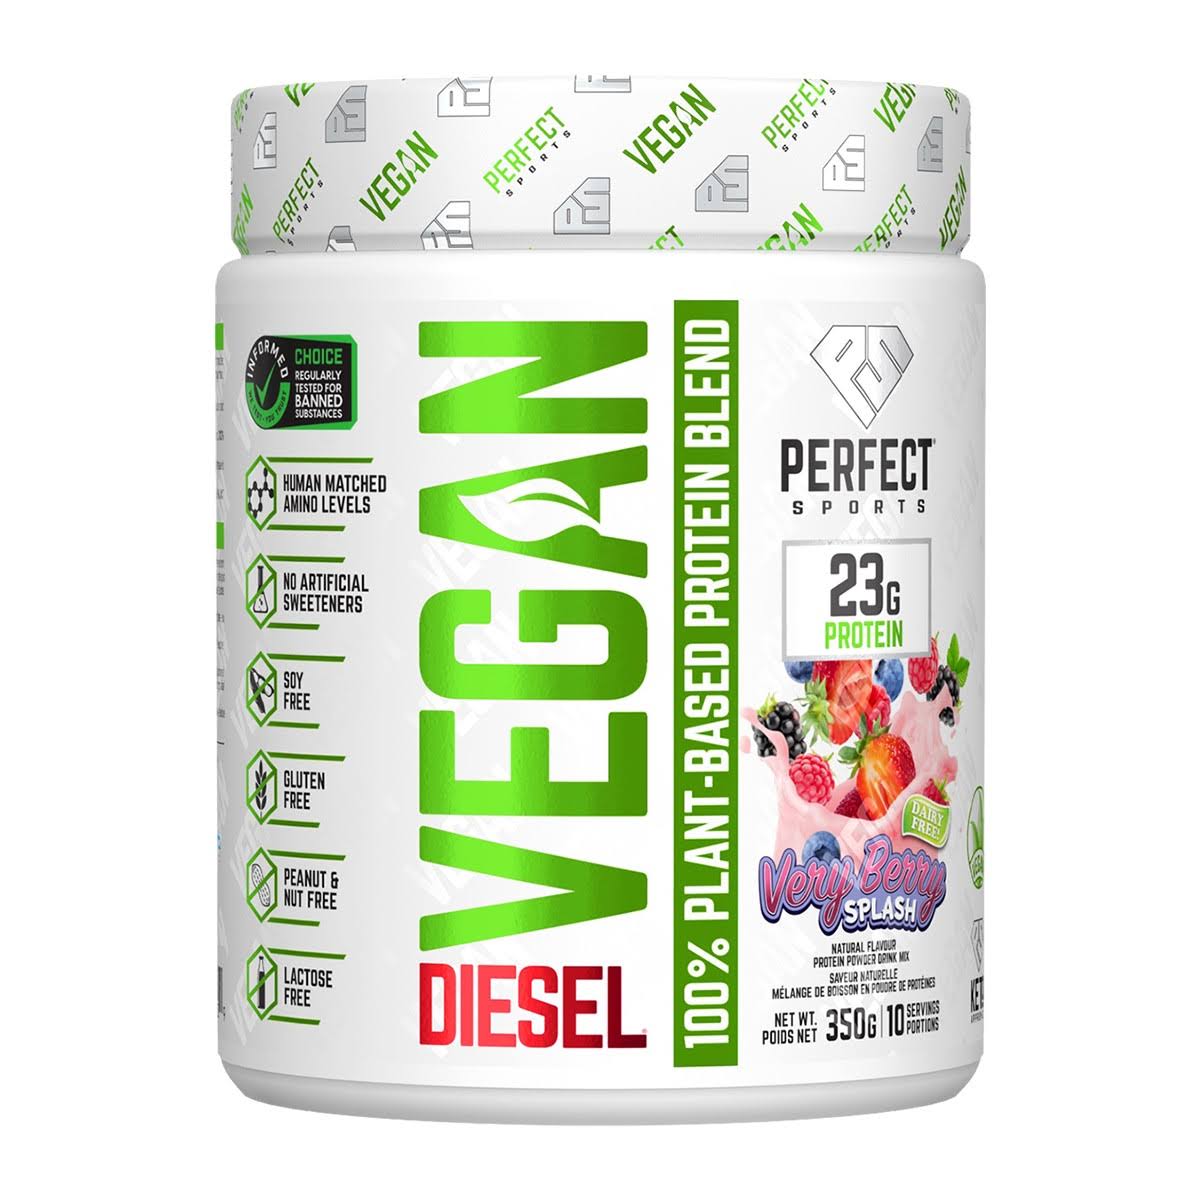 Perfect Sports DIESEL Vegan 100% Plant Based Protein Very Berry